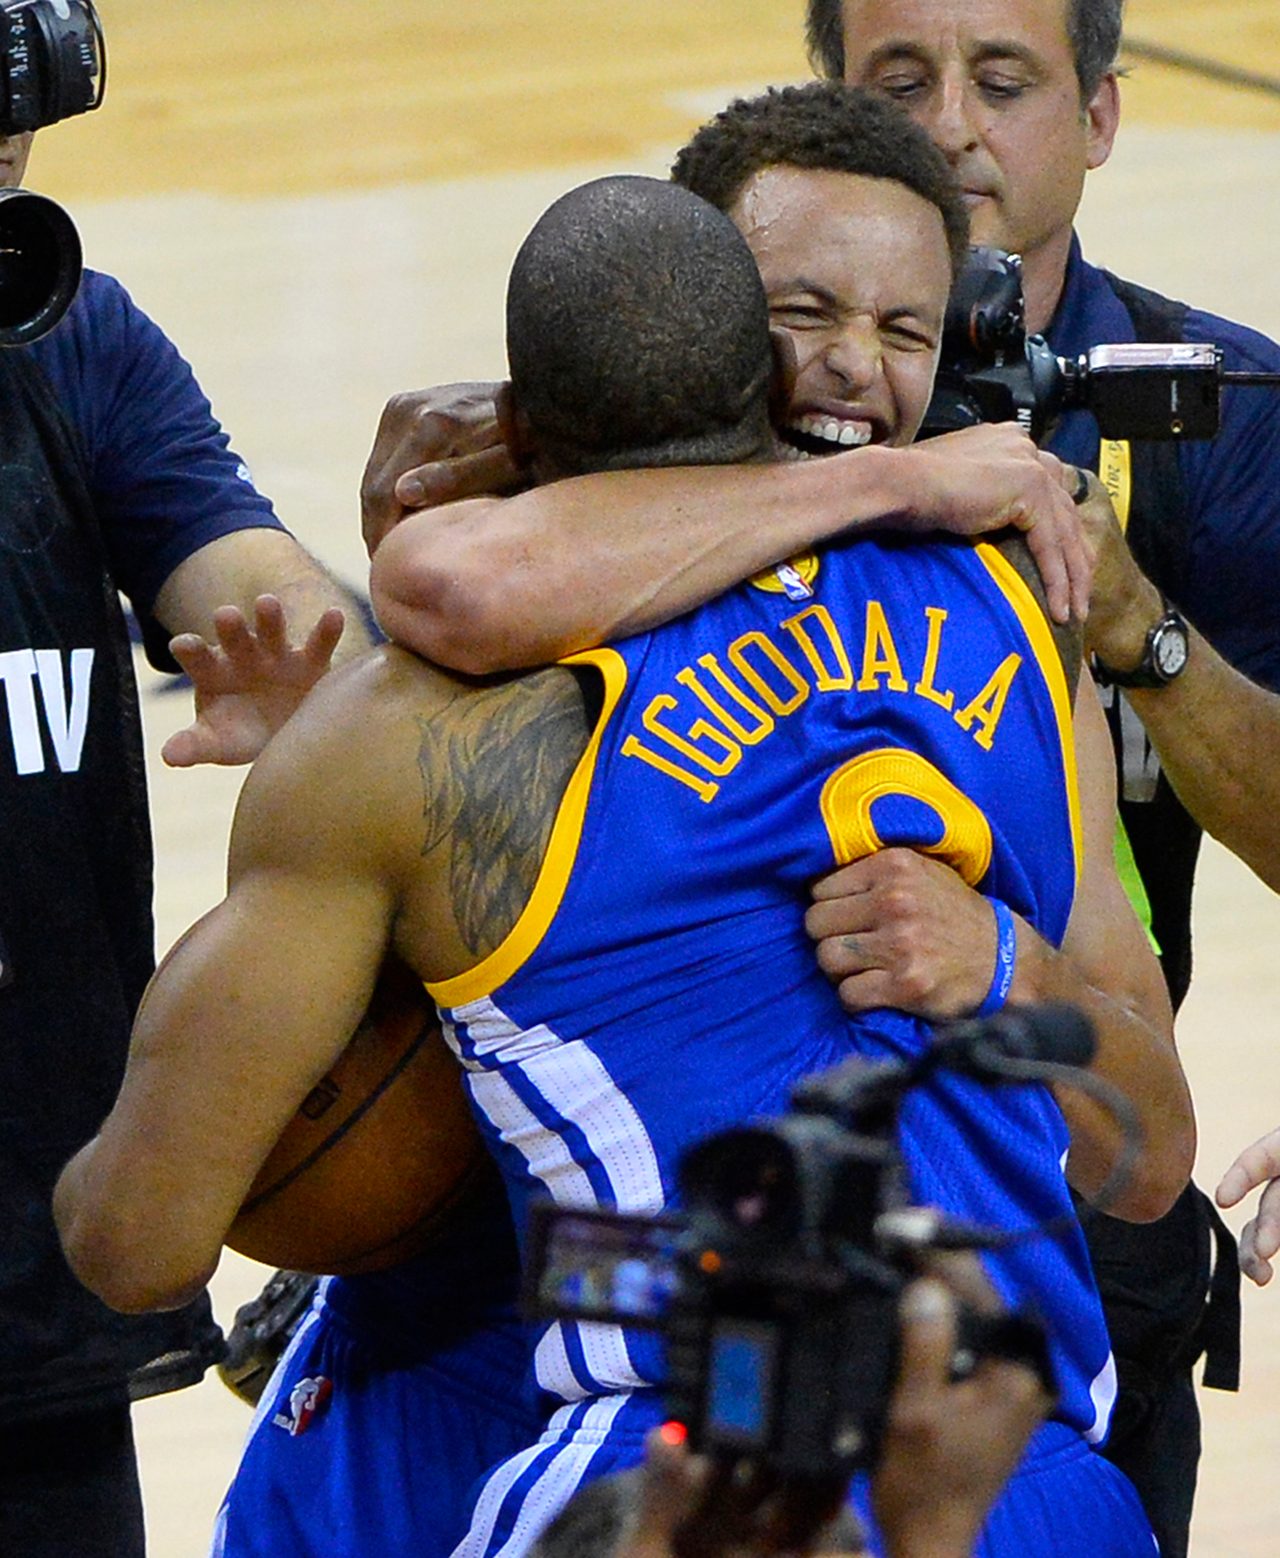 VICTORY HUG. Stephen Curry and Andre Iguodala embrace amid the celebration on the court. Photo by LARRY W. SMITH/EPA 